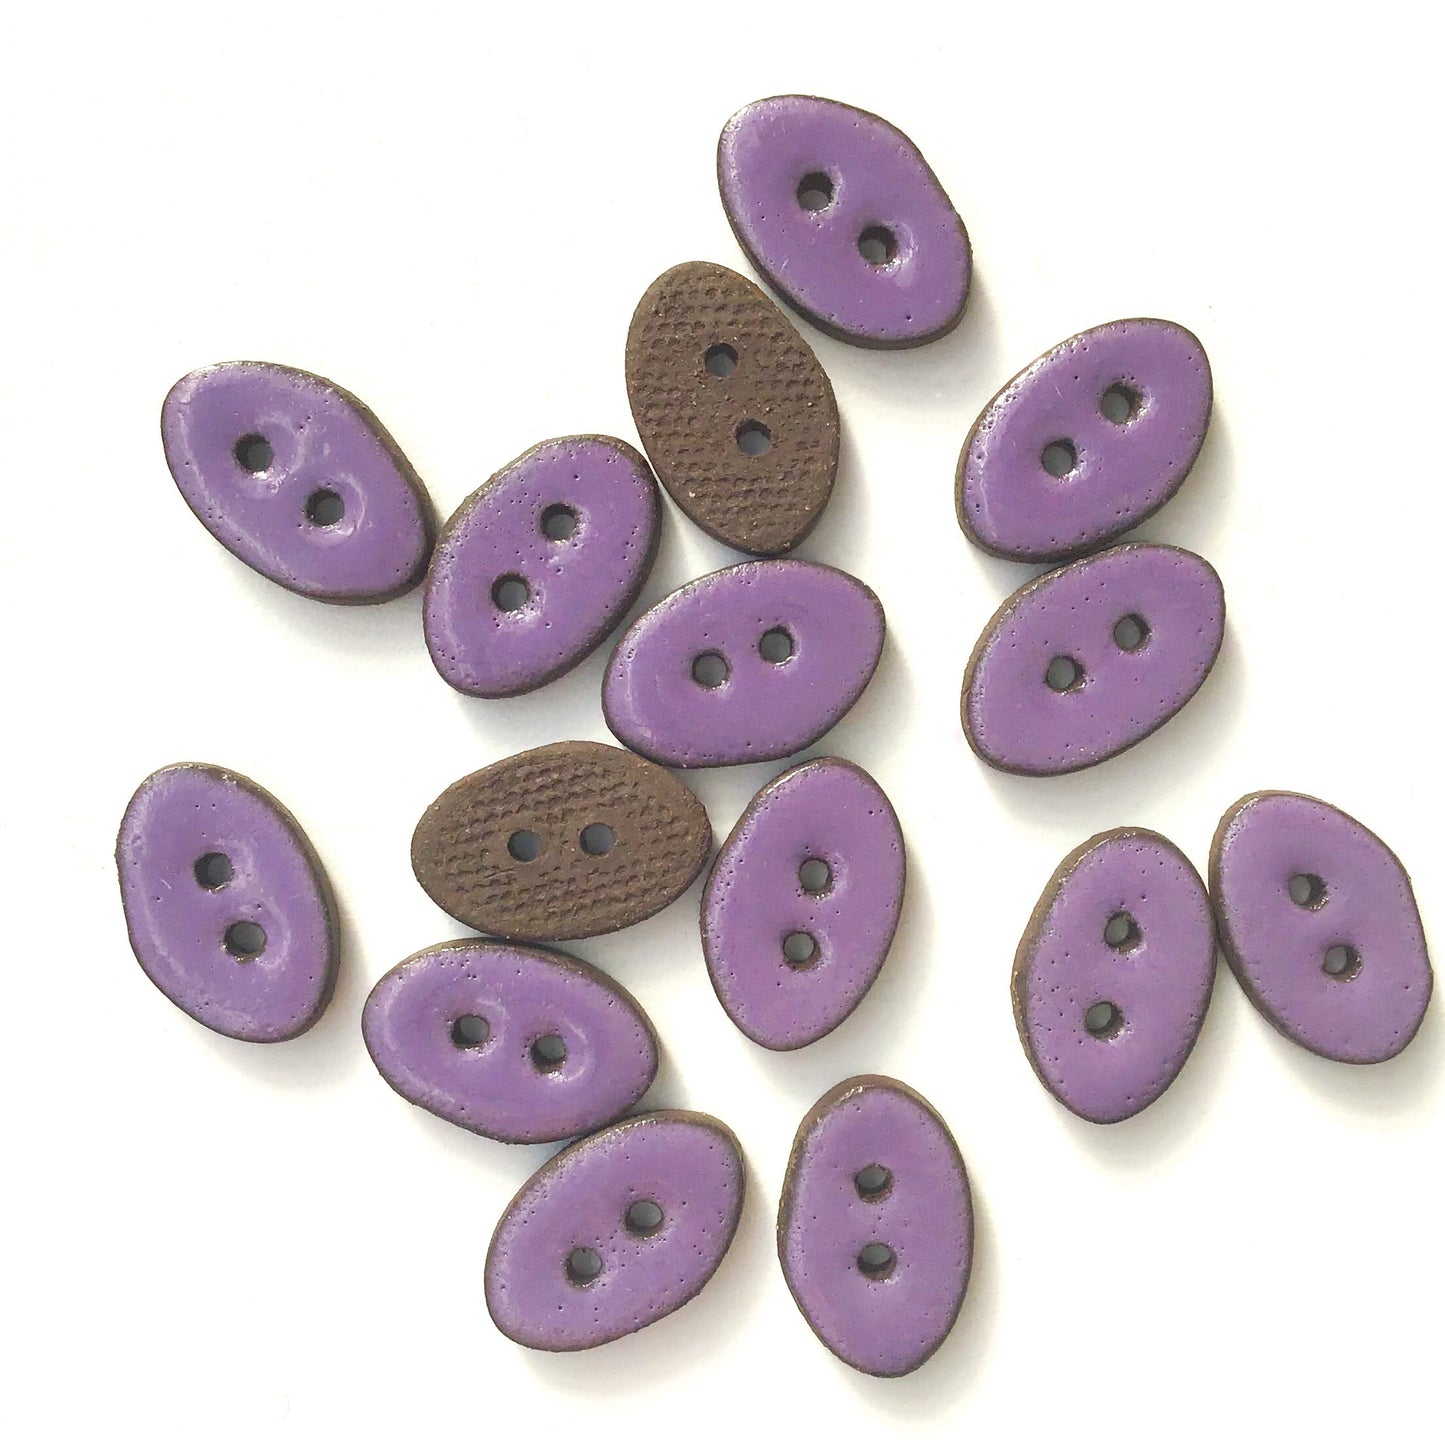 Purple Oval Clay Buttons on Black Clay - 1/2" x 3/4" (ws-175)